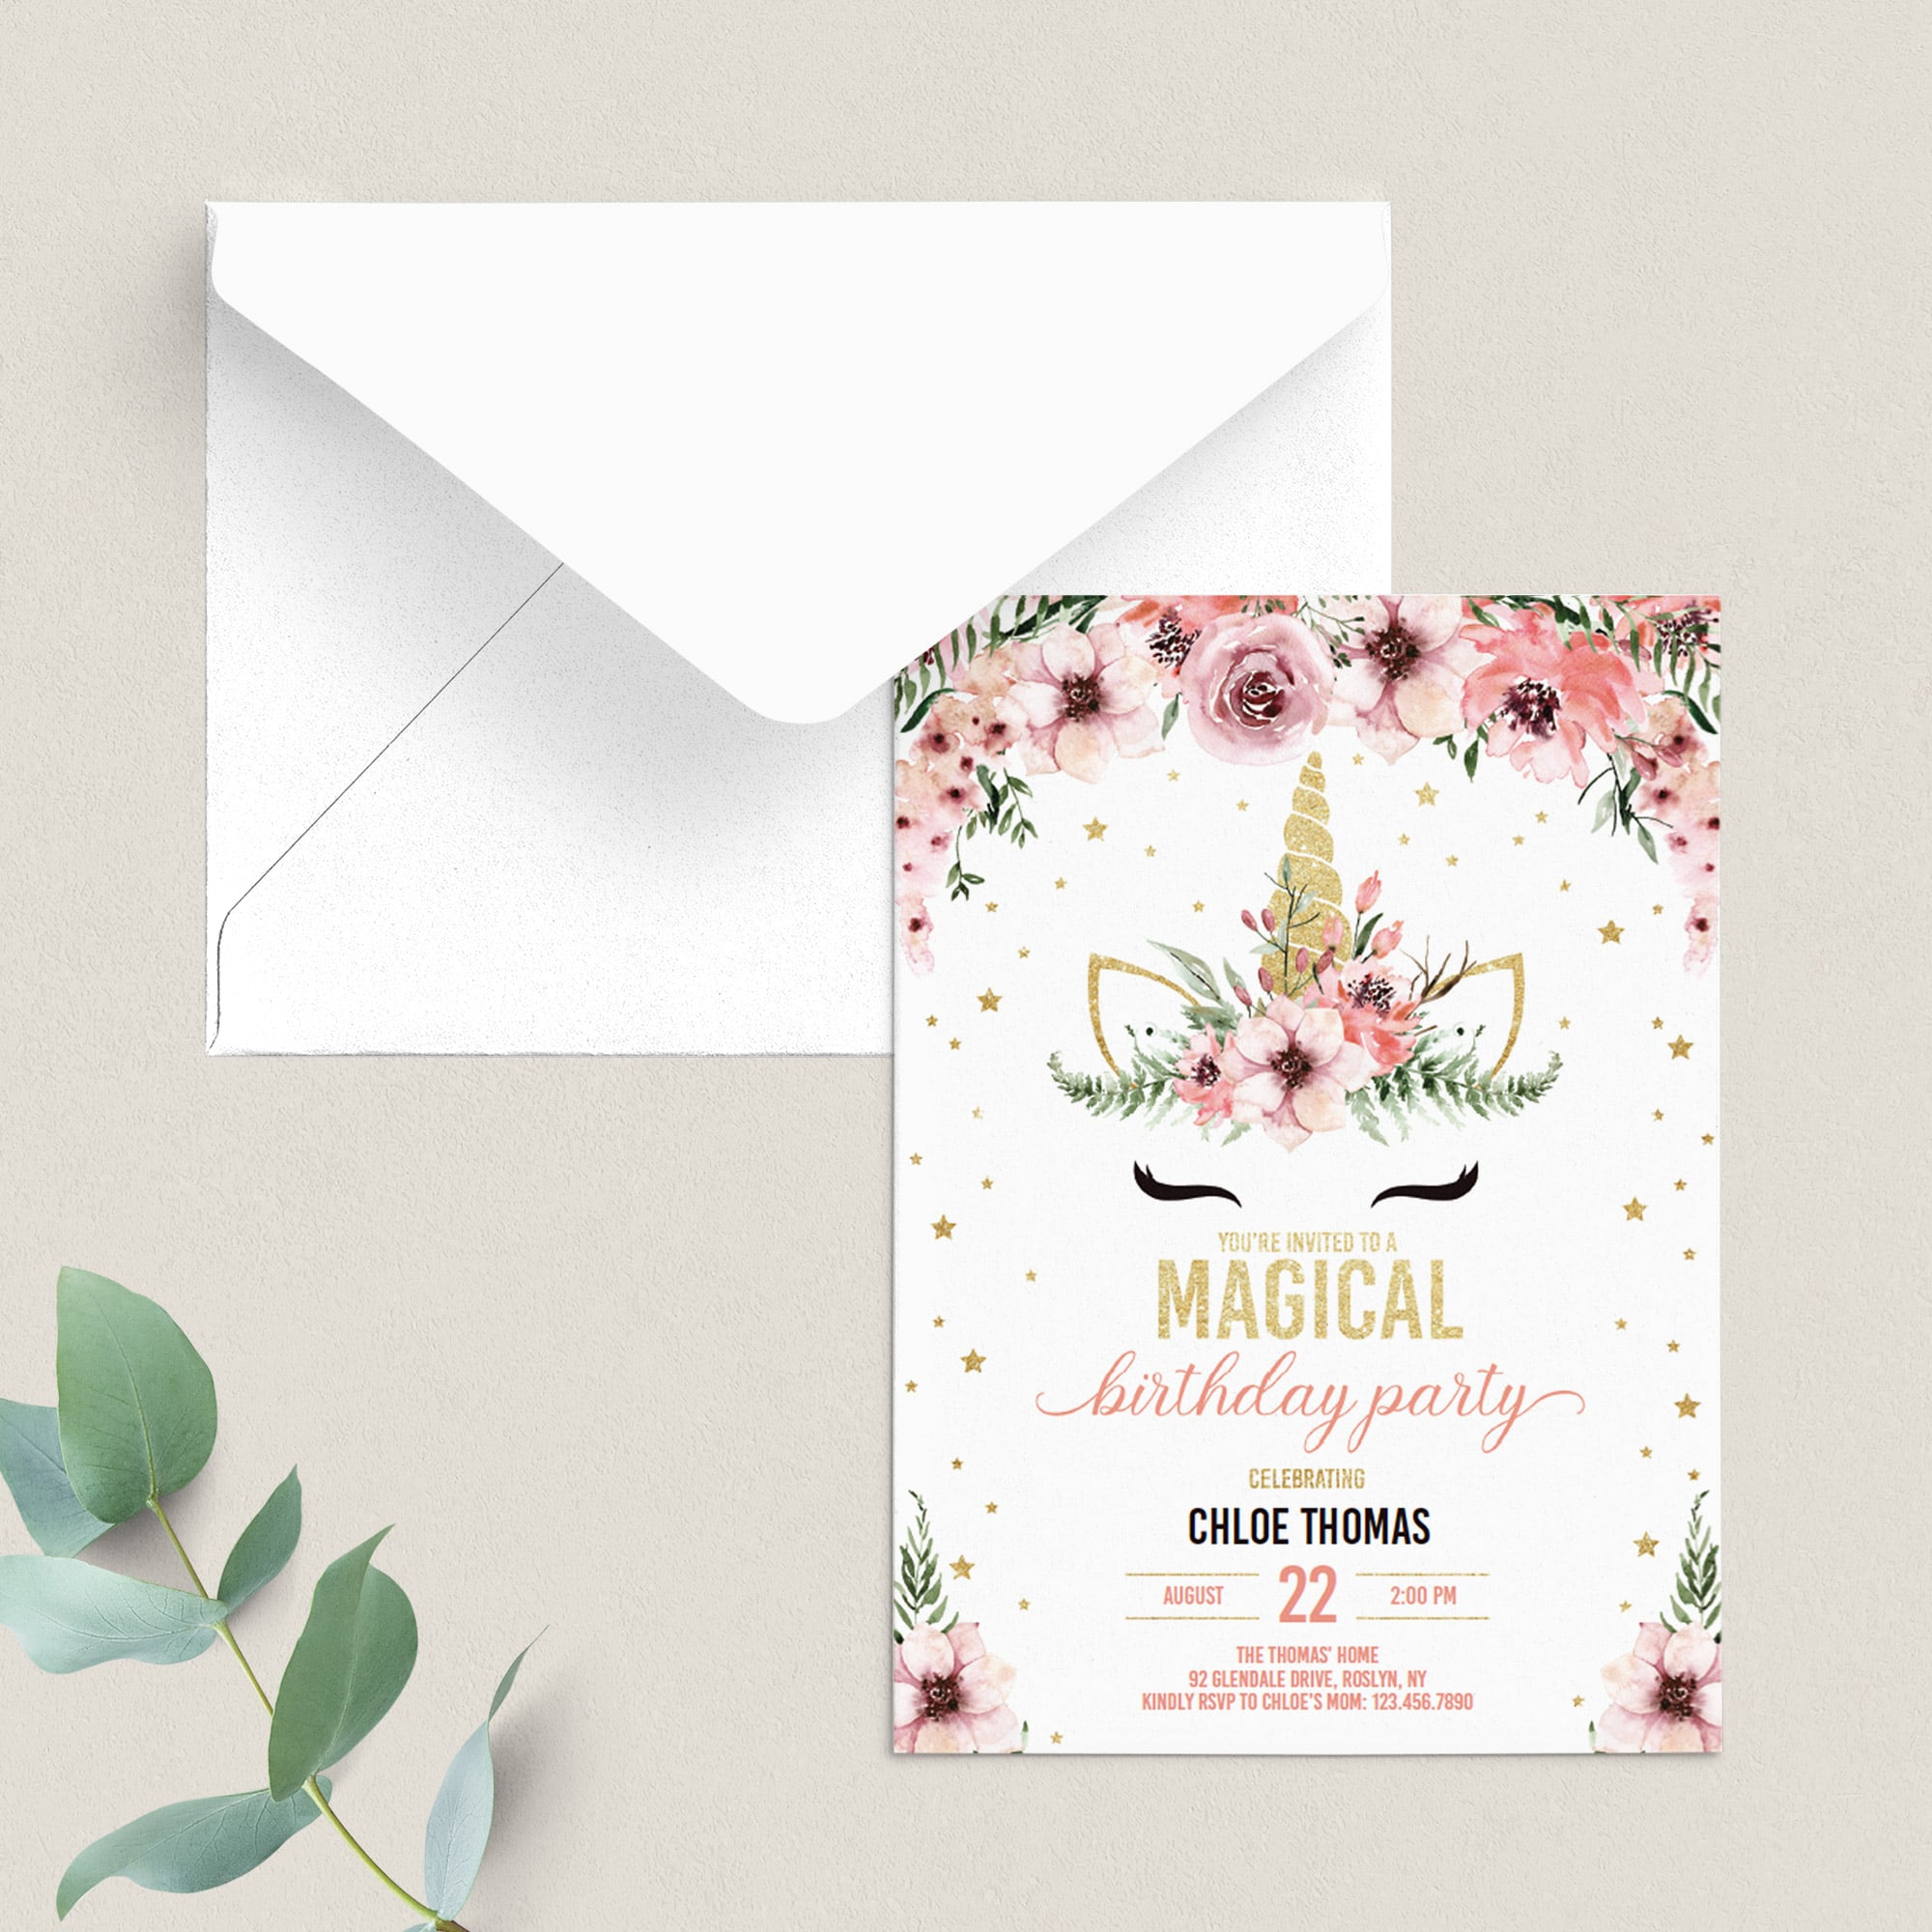 Floral unicorn birthday party invitation cards editable template by LittleSizzle